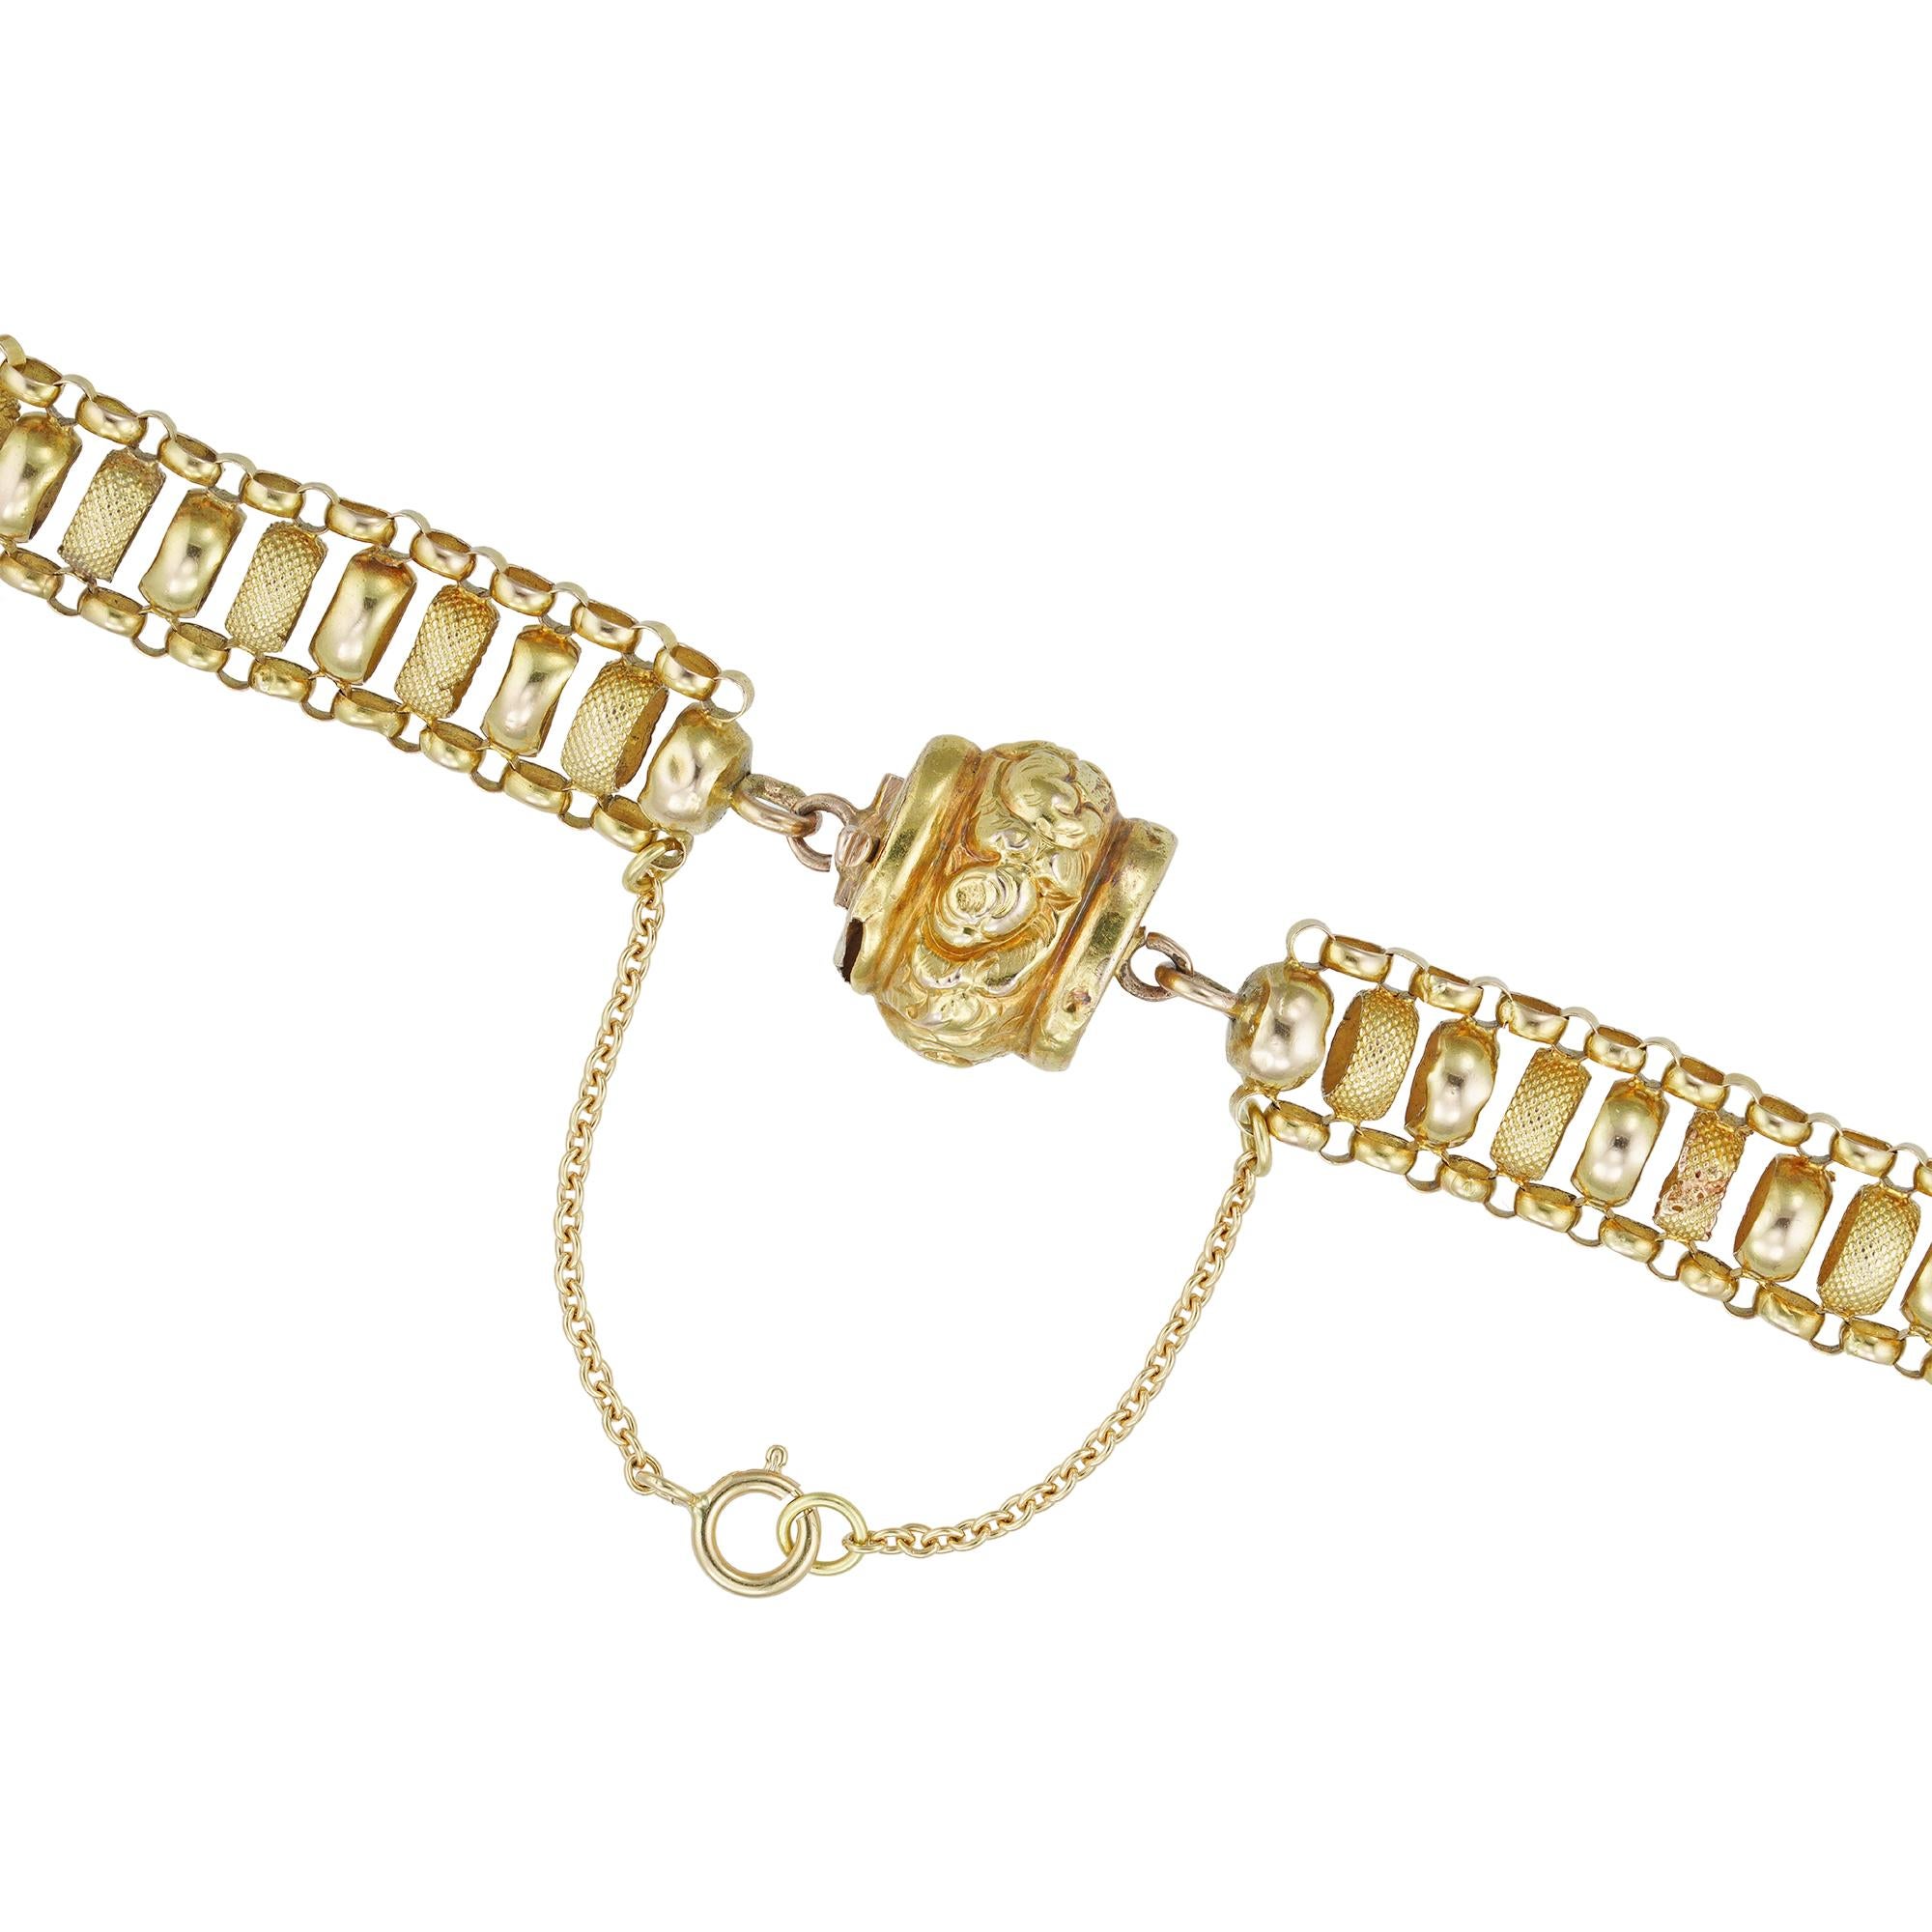 A Victorian long yellow gold chain, the chain comprising alternately-set plain and textured cylindrical yellow gold loops, with smaller cylindrical links lining either side, to a ball snap clasp with floral decoration, measuring approximately 138 x